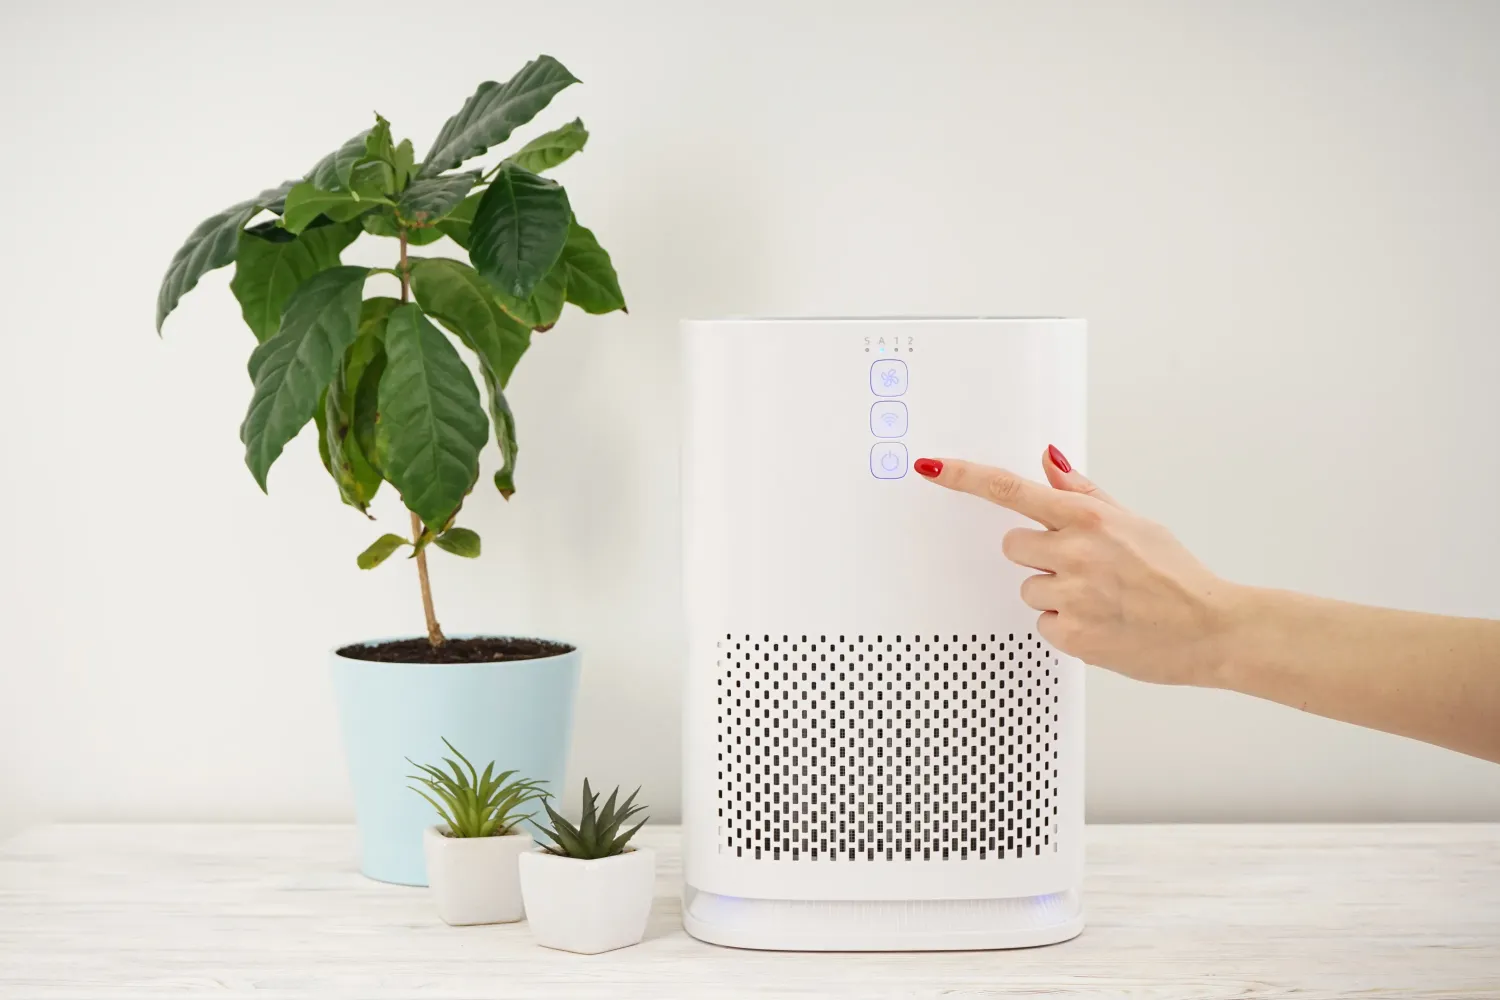 Selection of top low EMF air purifiers in a healthy indoor environment